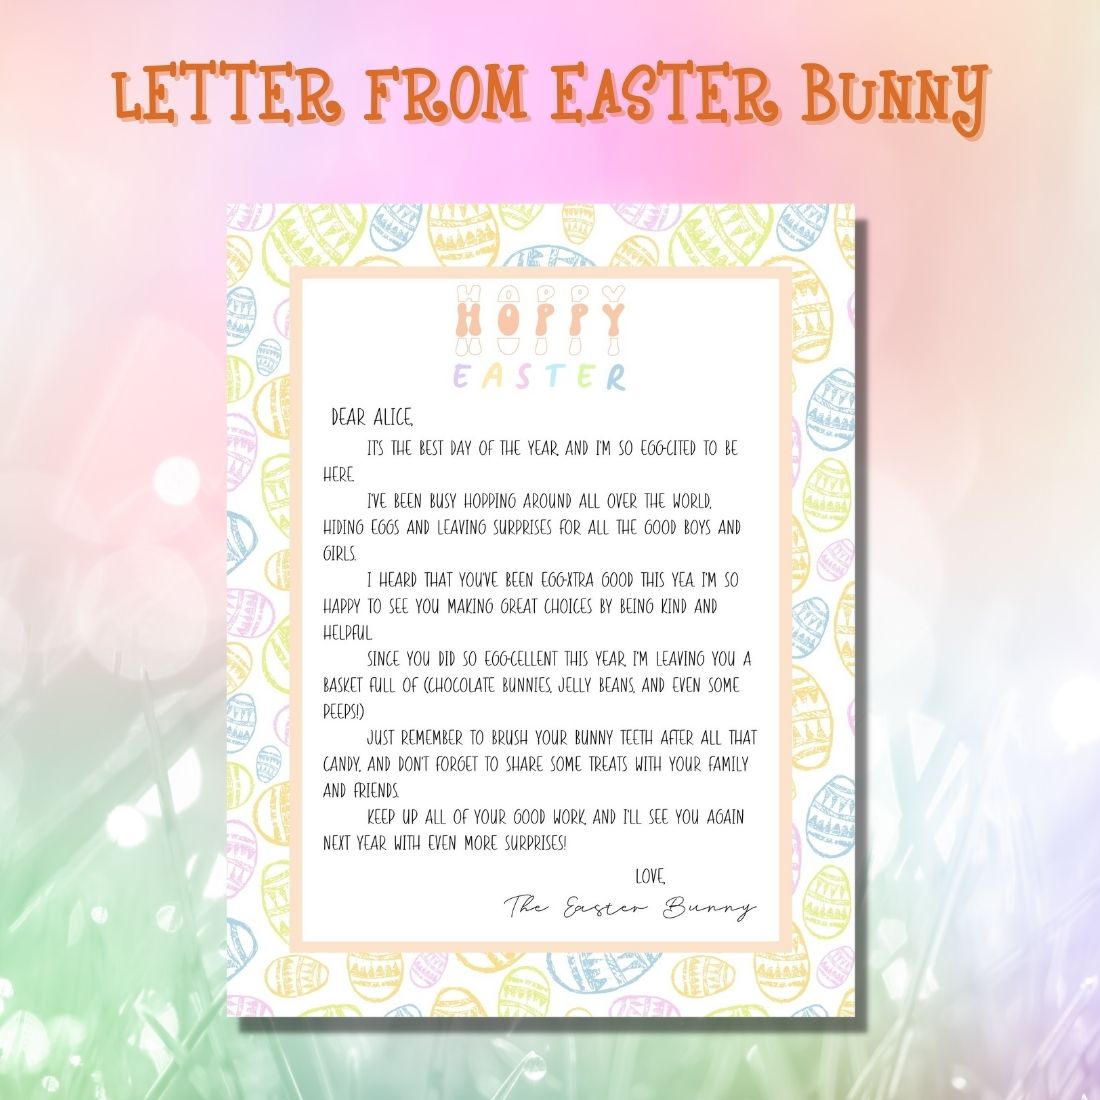 Editable Easter Bunny Letter & Certificates preview image.